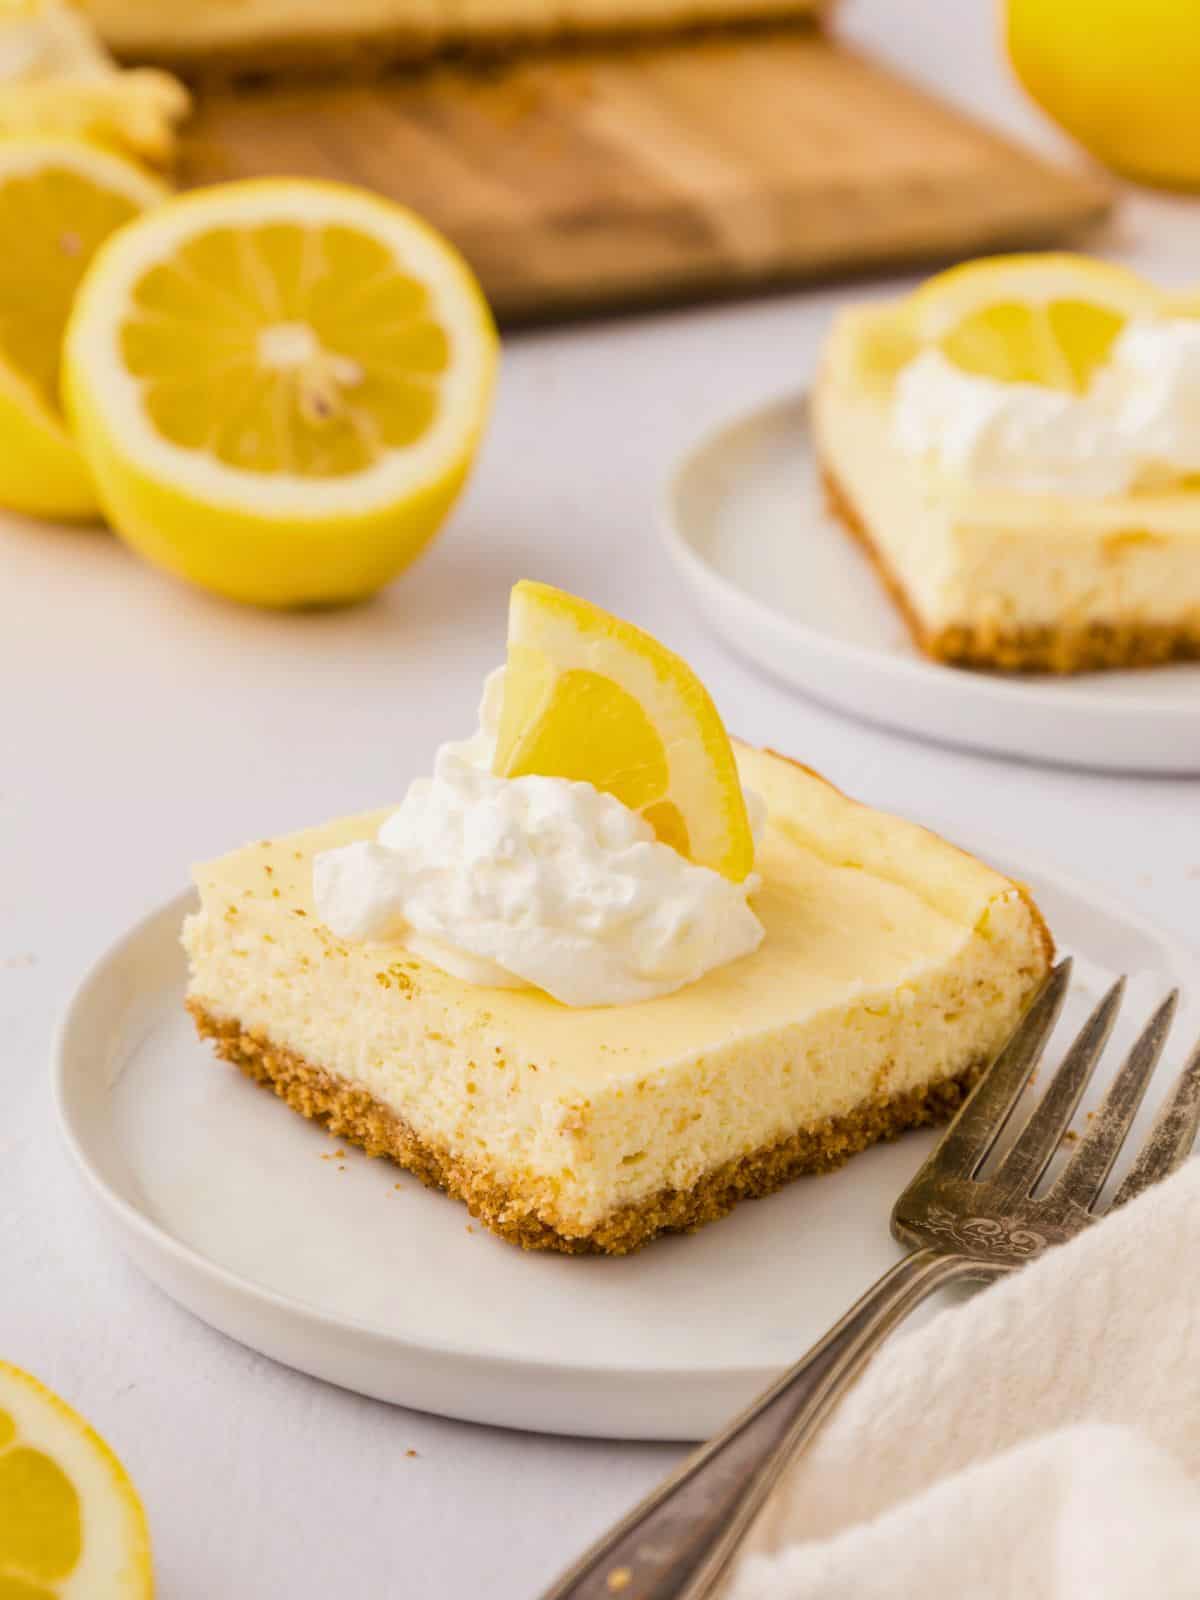 One lemon cheesecake bar on white plate topped with whipped cream and a lemon wedge.